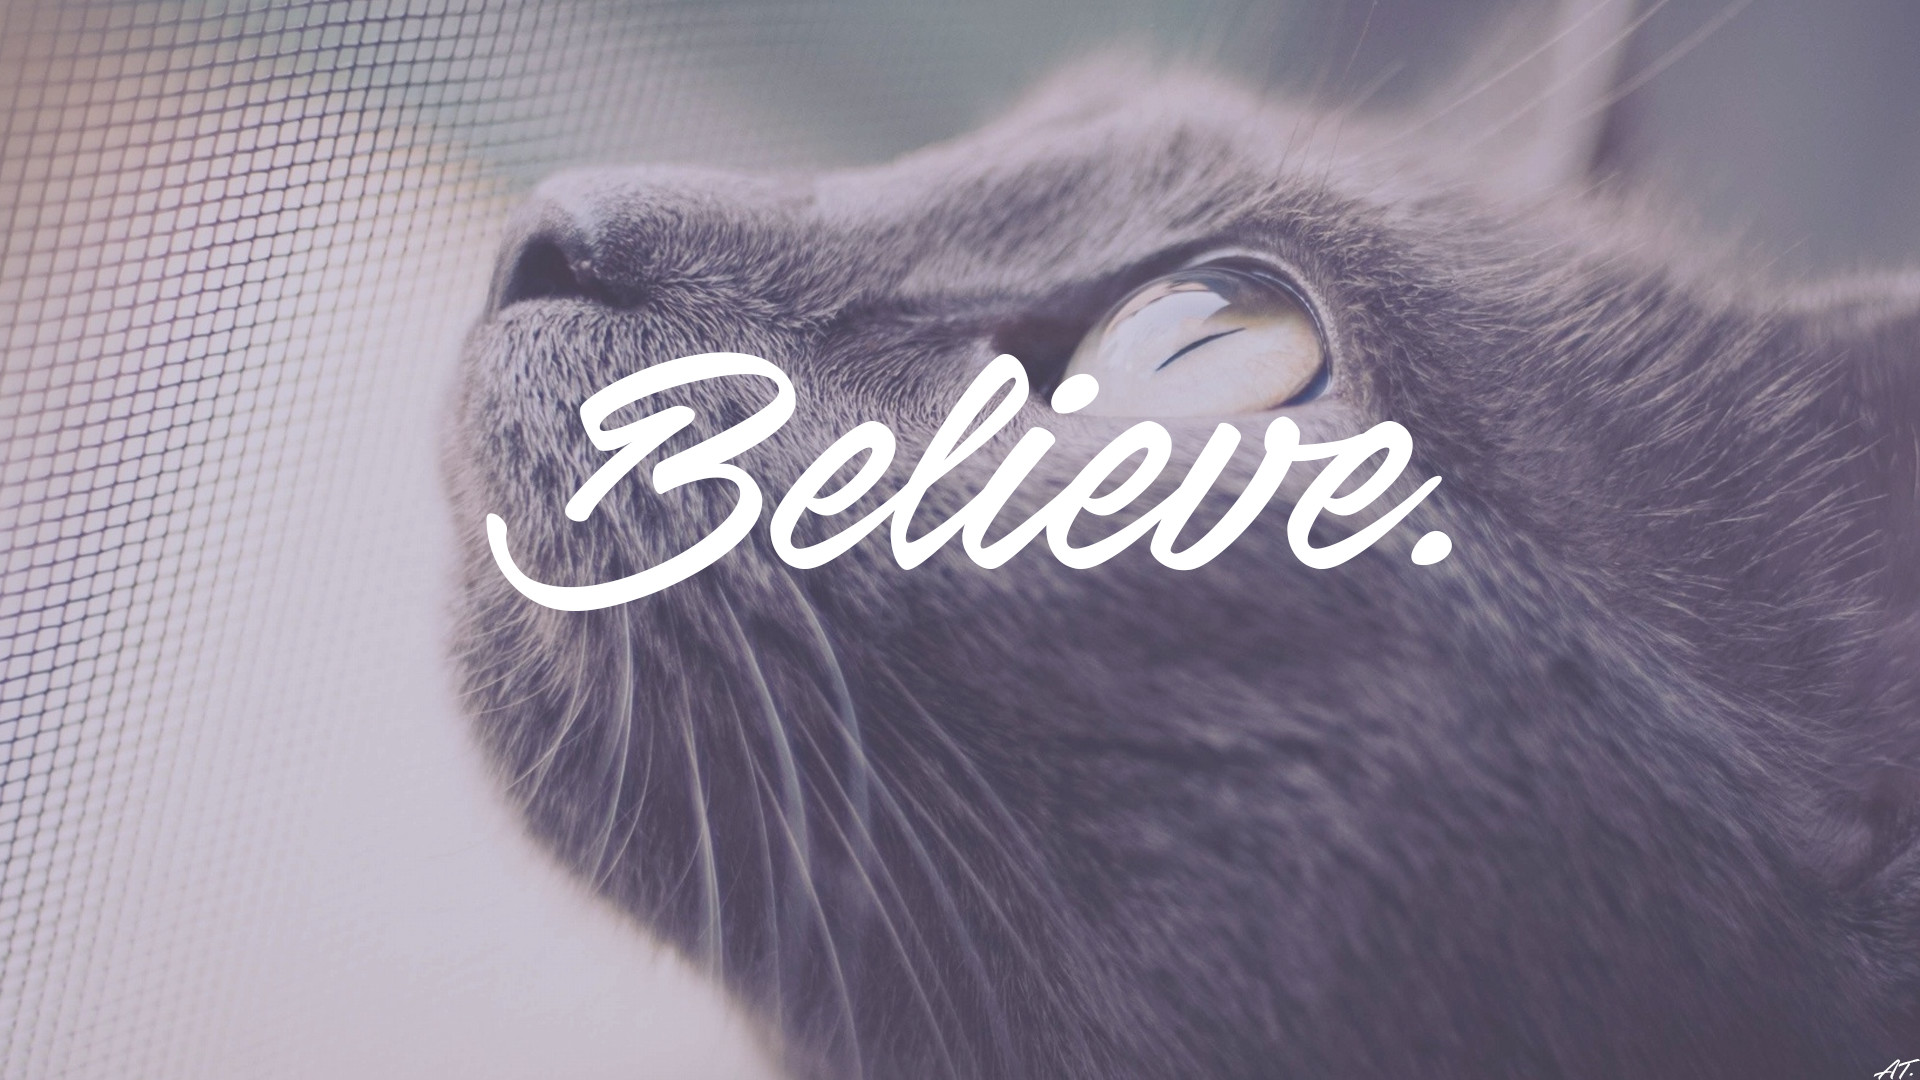 1920x1080 ... cat animals i want to believe dark writing wallpapers hd ...